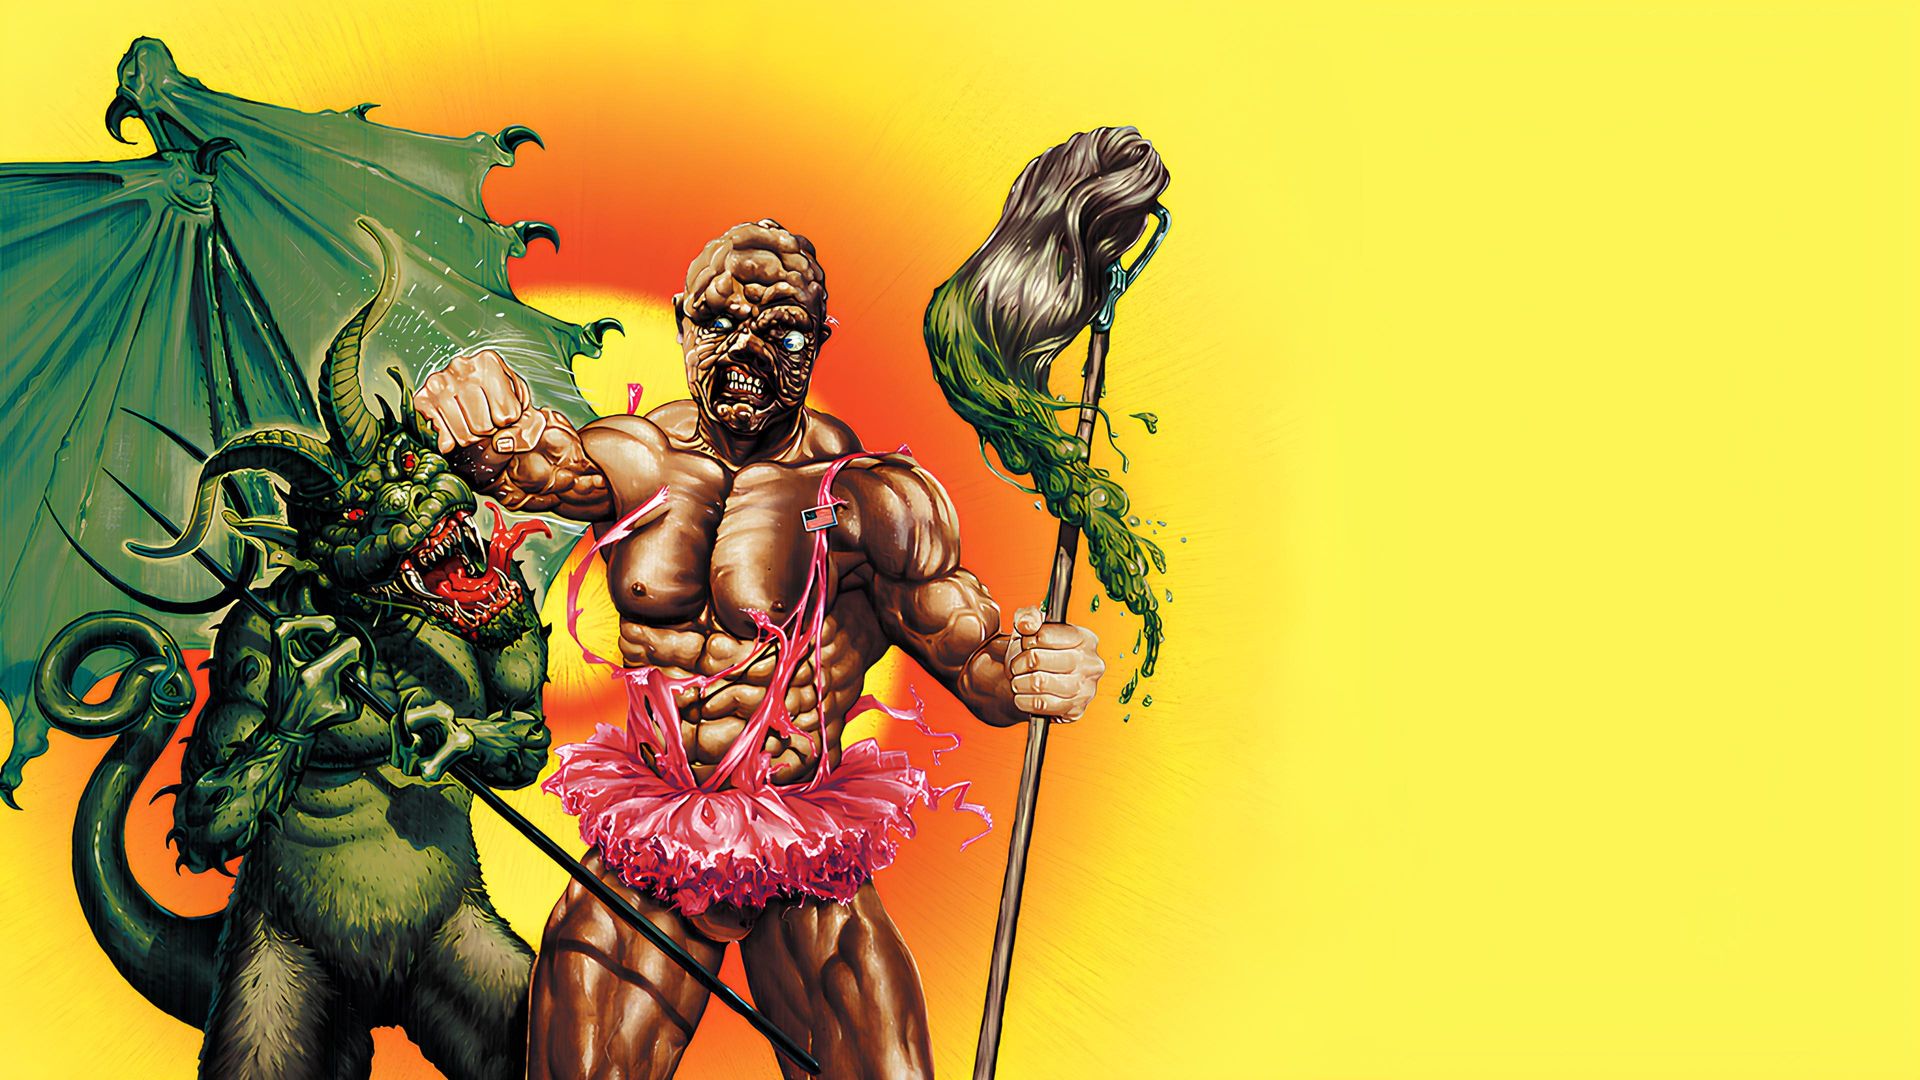 The Toxic Avenger Part III: The Last Temptation of Toxie background